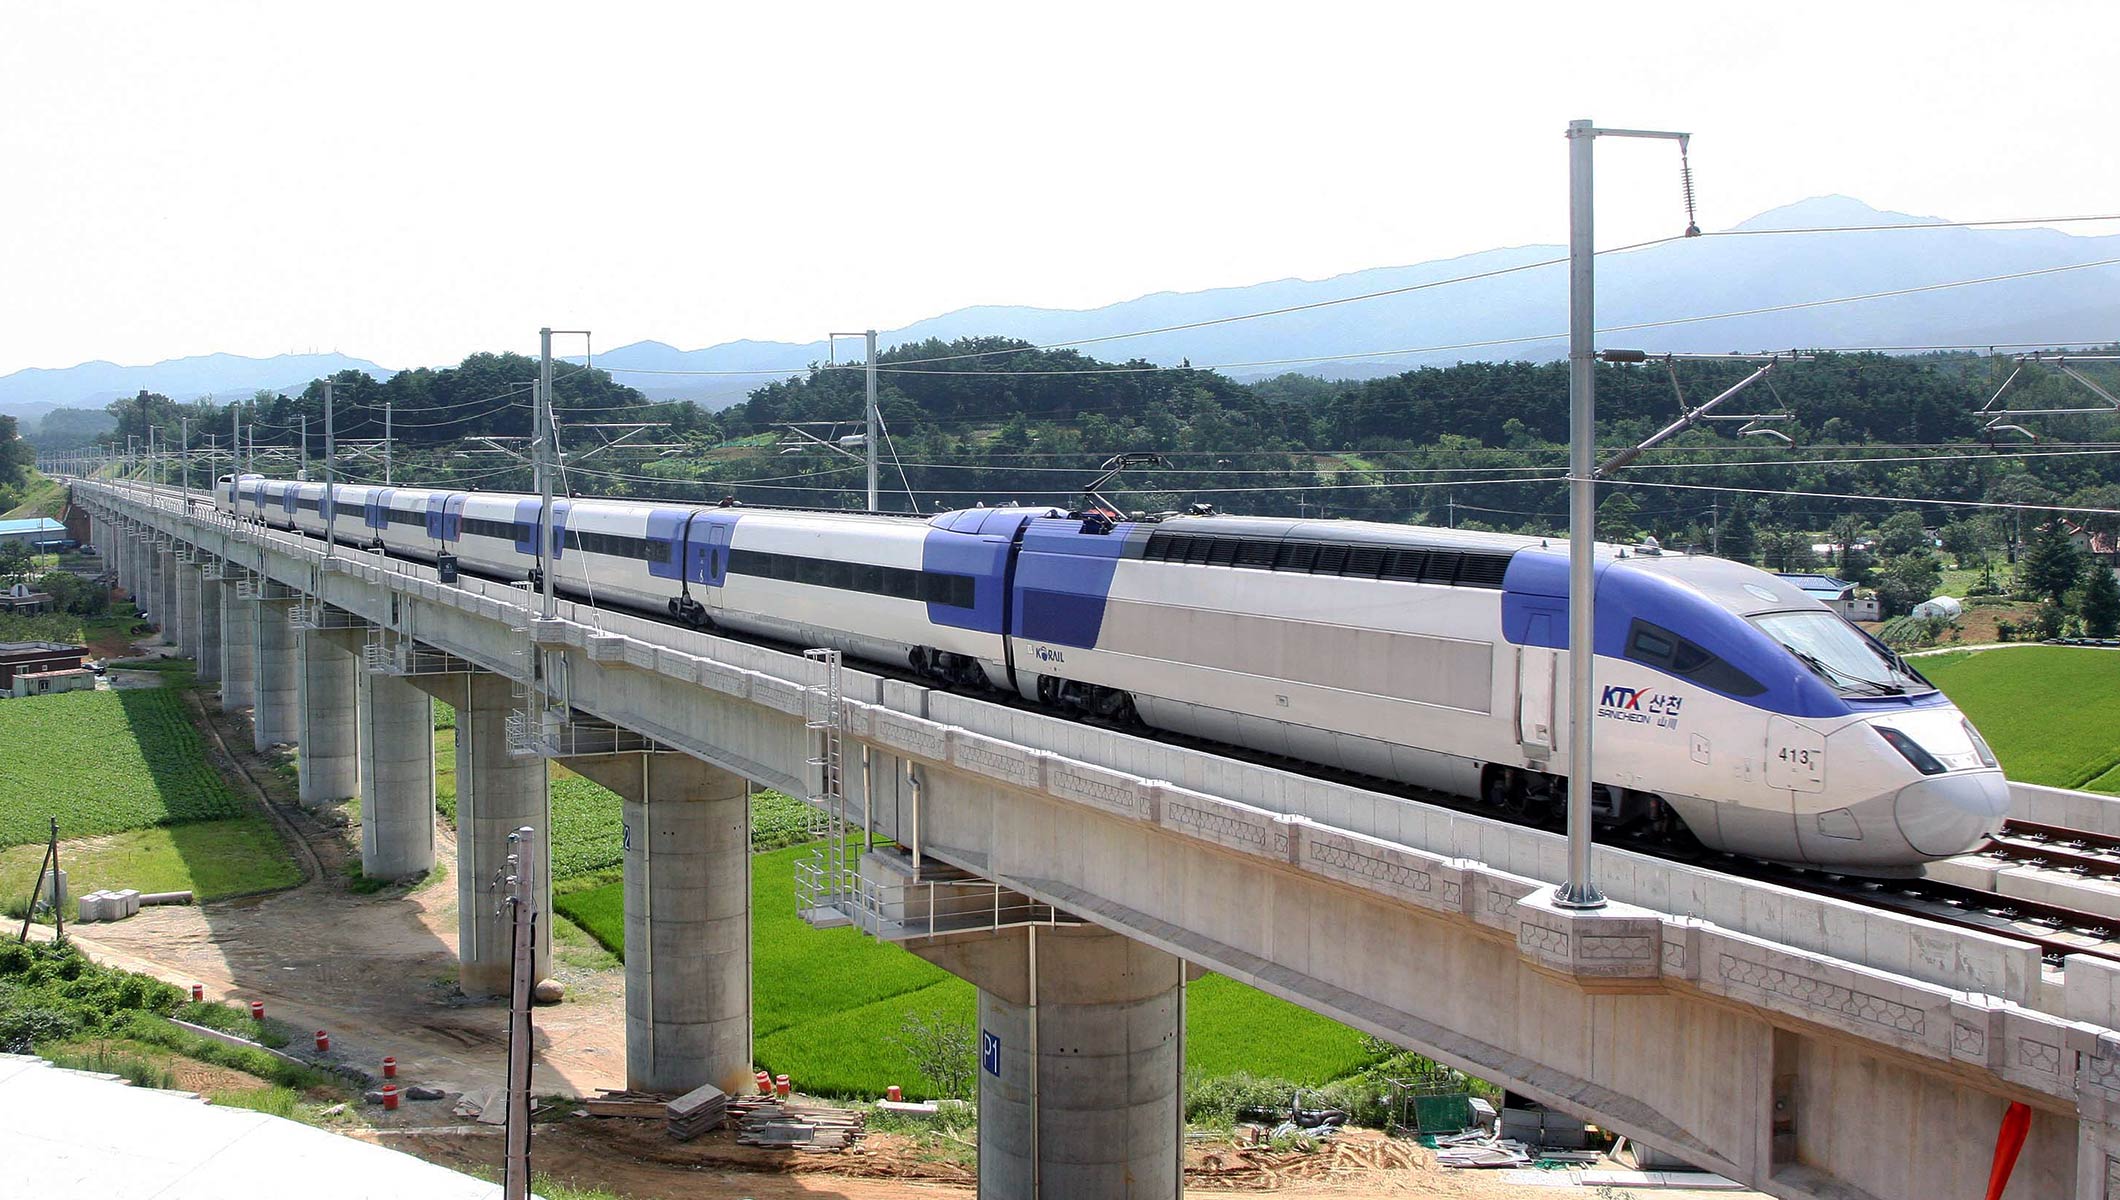 KTX high-speed rail tickets to PyeongChang go on sale - Olympic News